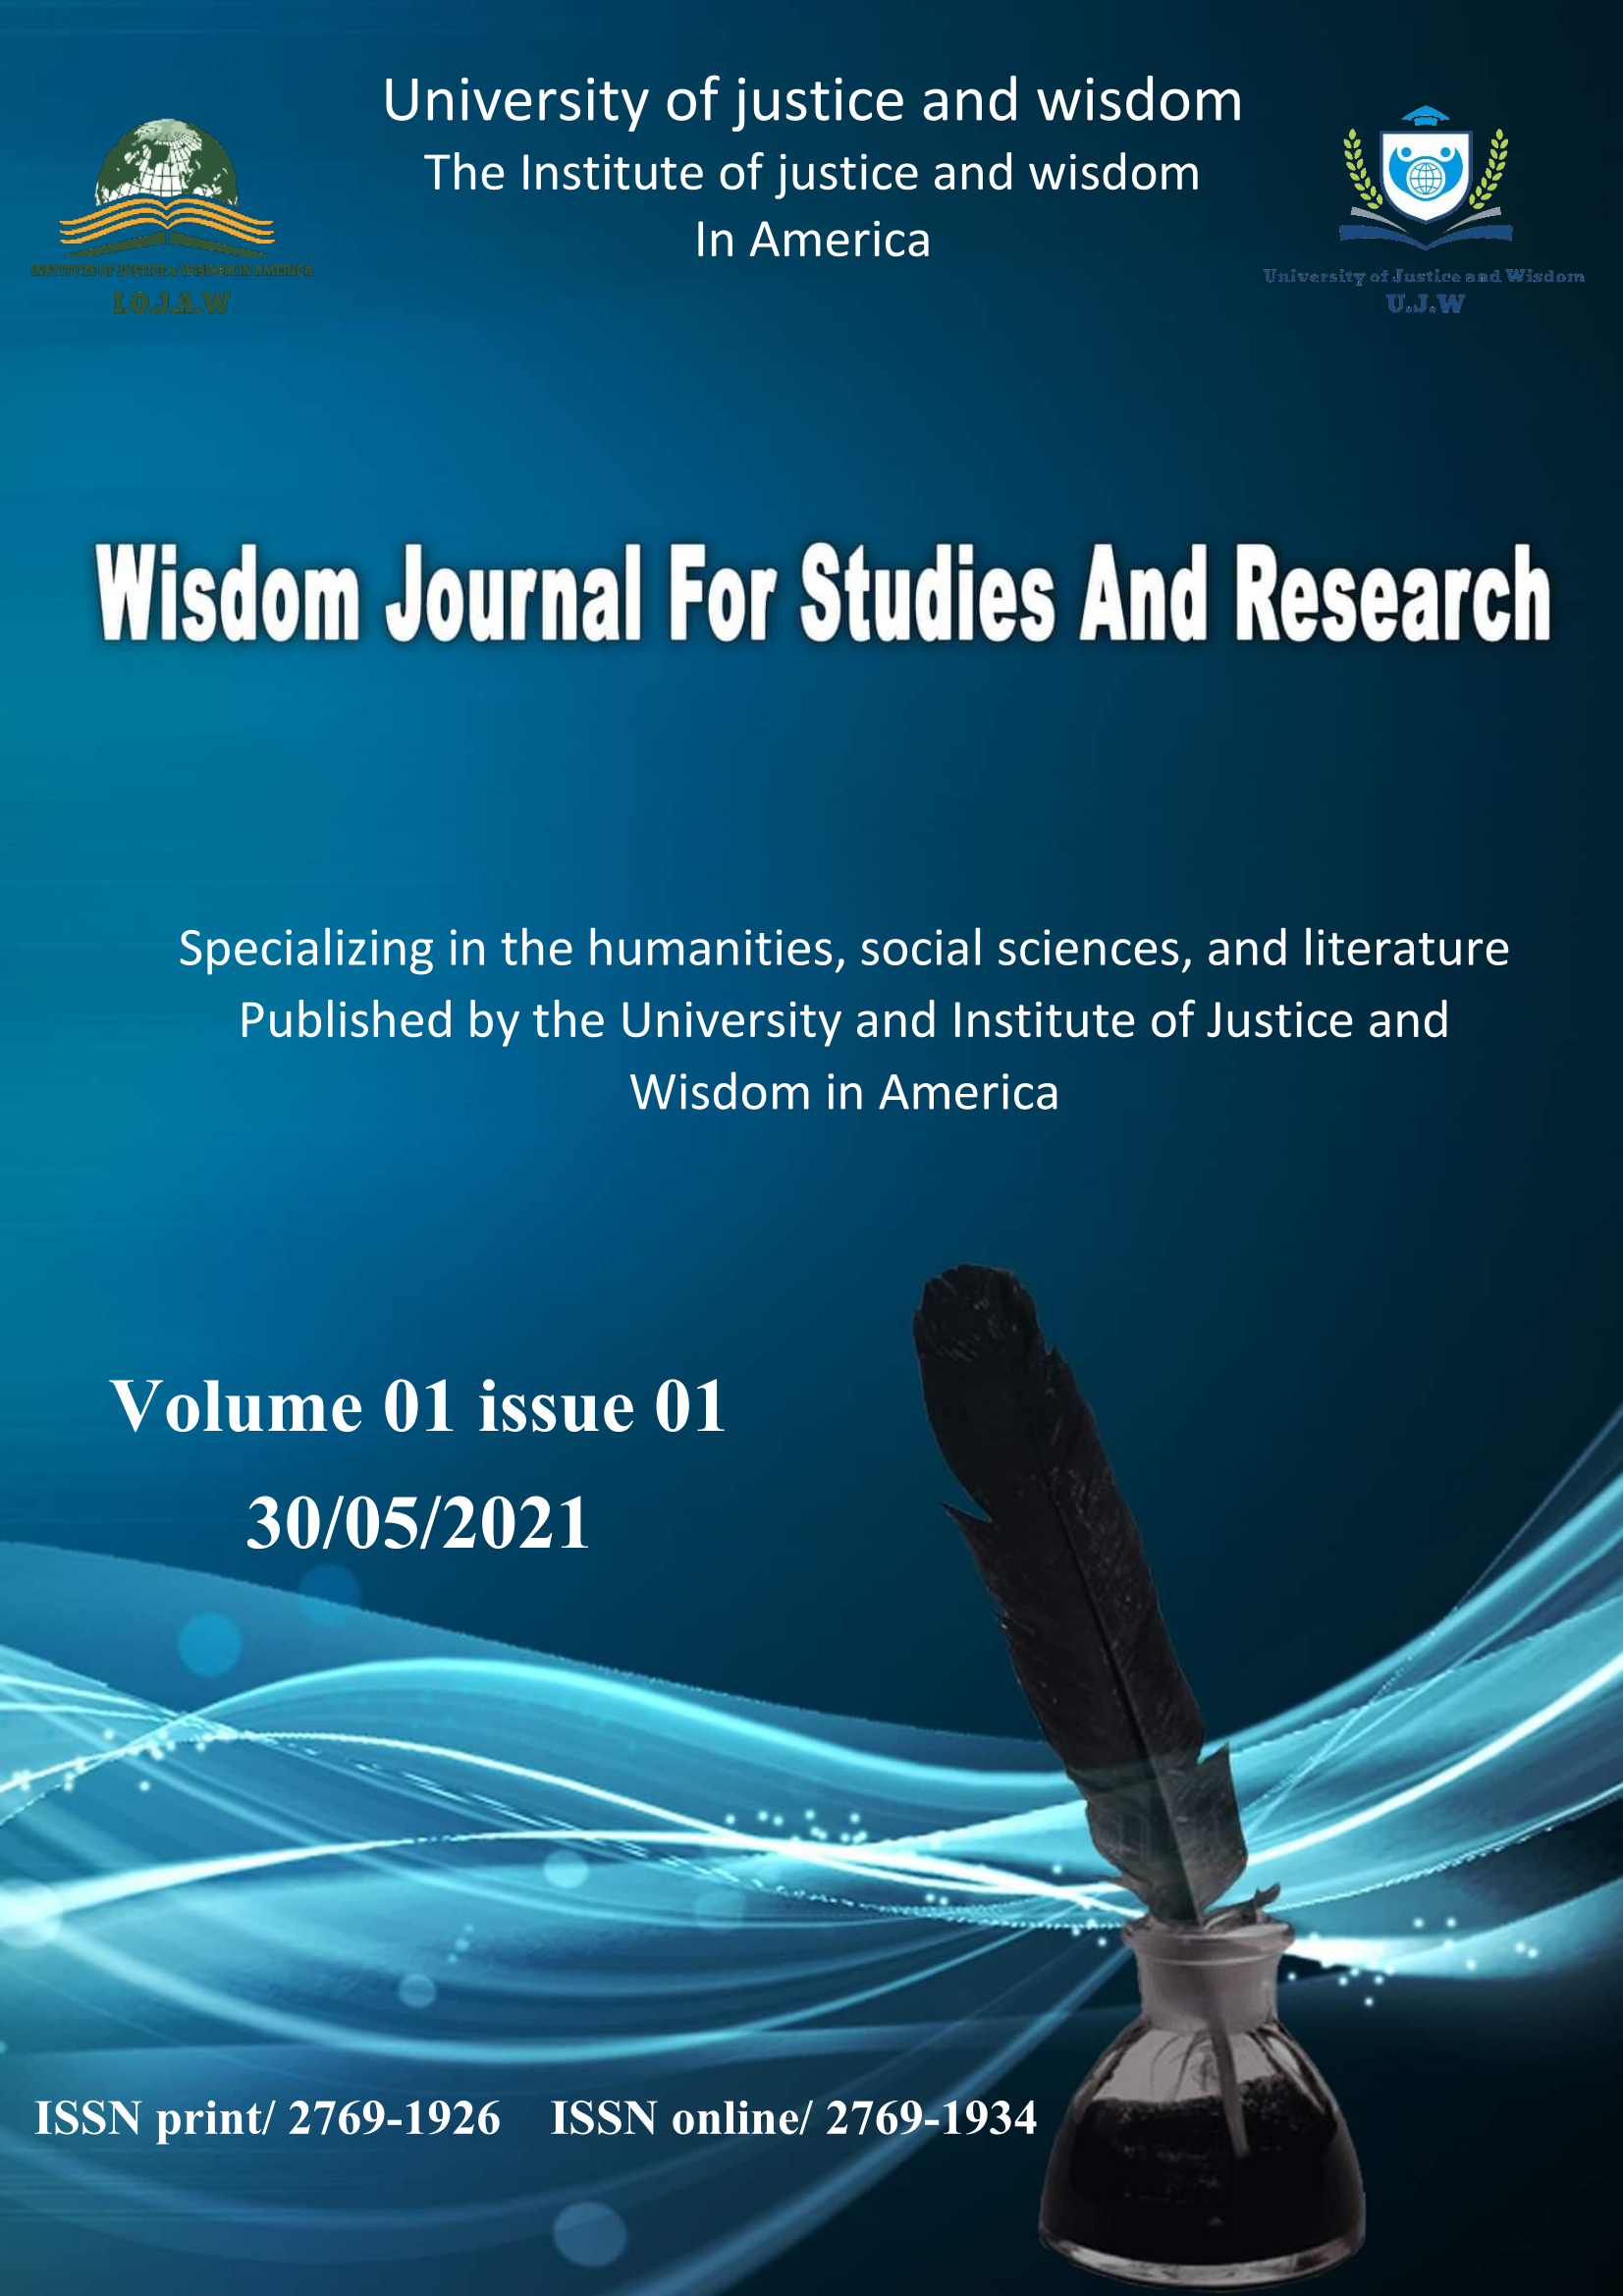 The Journal of Wisdom for Studies and Research (J.O.W. F.S.R.)